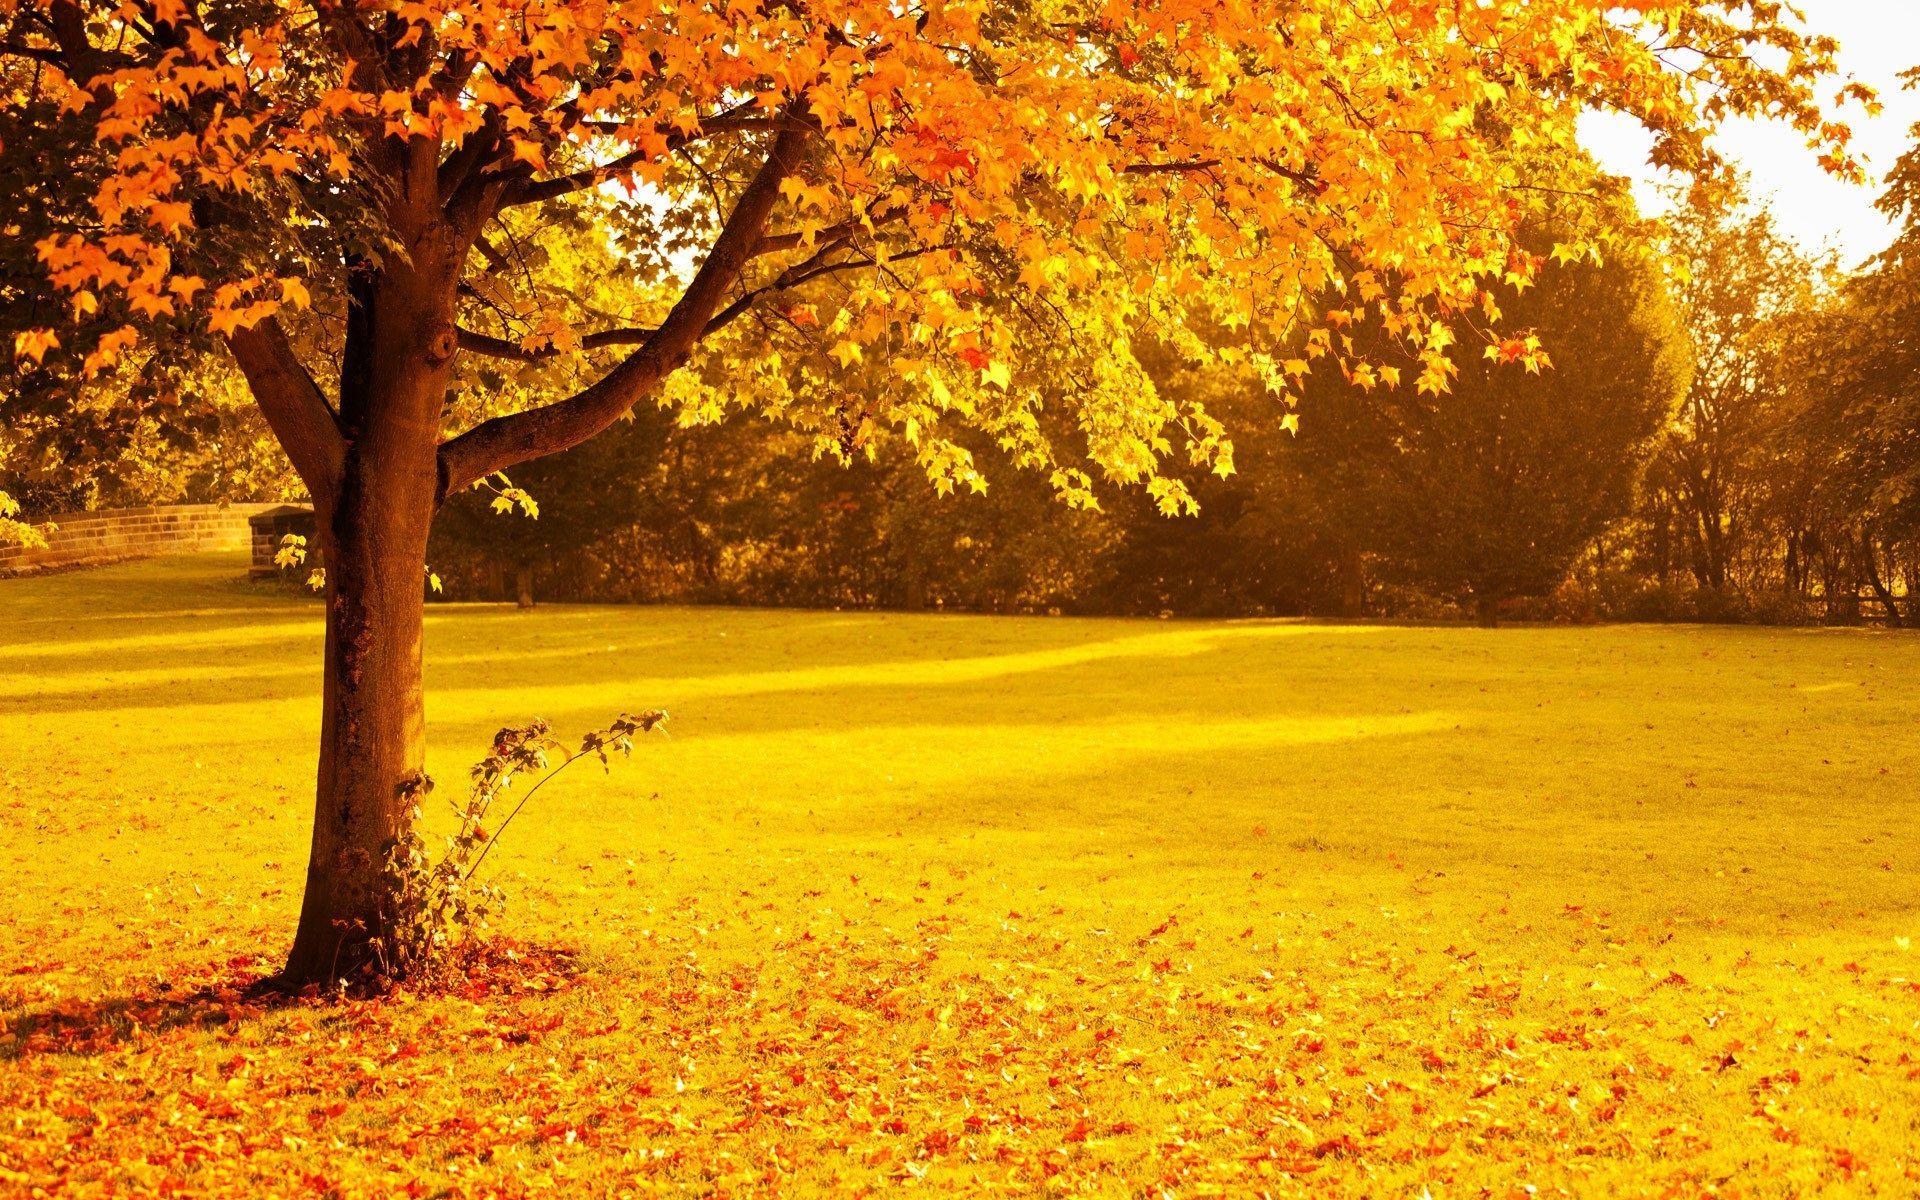 HQ Wallpaper Plus provides different size of Yellow Autumn Trees HD